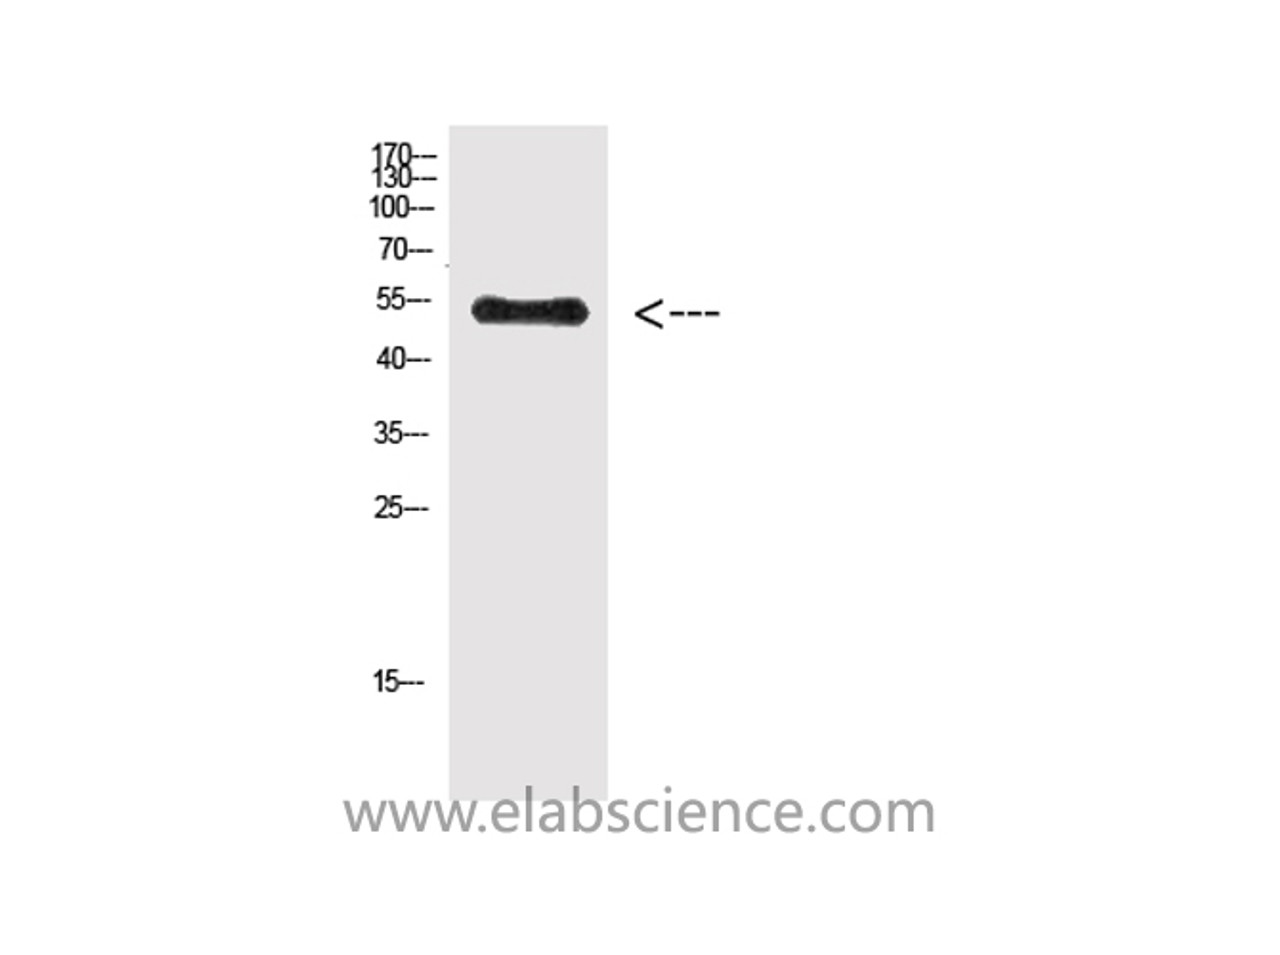 Western Blot analysis of Hela cells using Phospho-Vimentin (Tyr38) Polyclonal Antibody at dilution of 1:500.